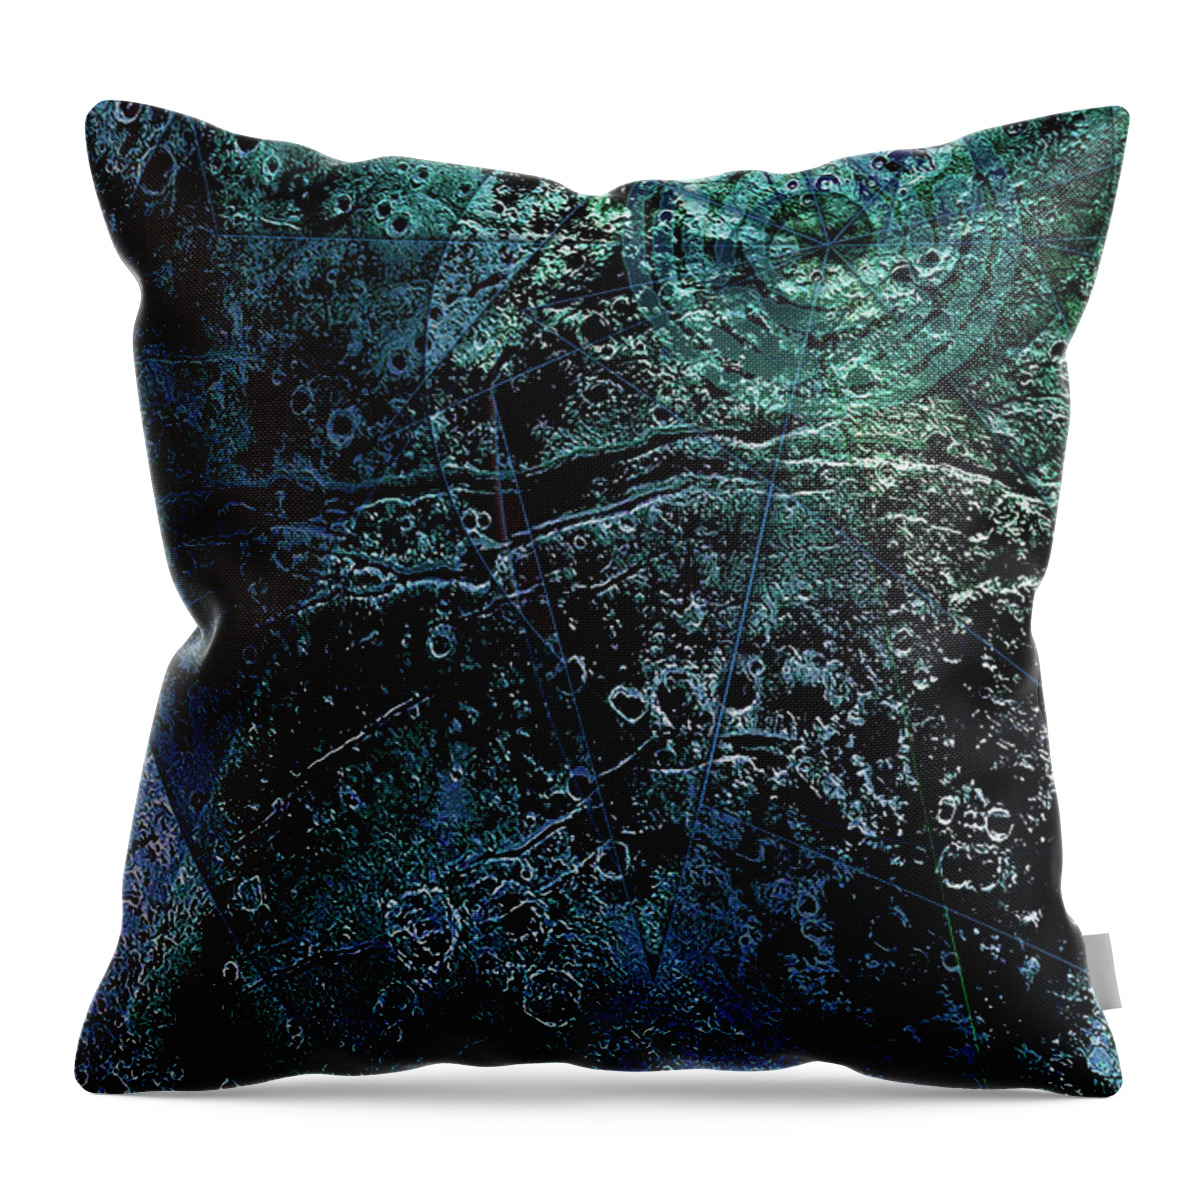 Topography Throw Pillow featuring the digital art Revolution 9a by Kenneth Armand Johnson